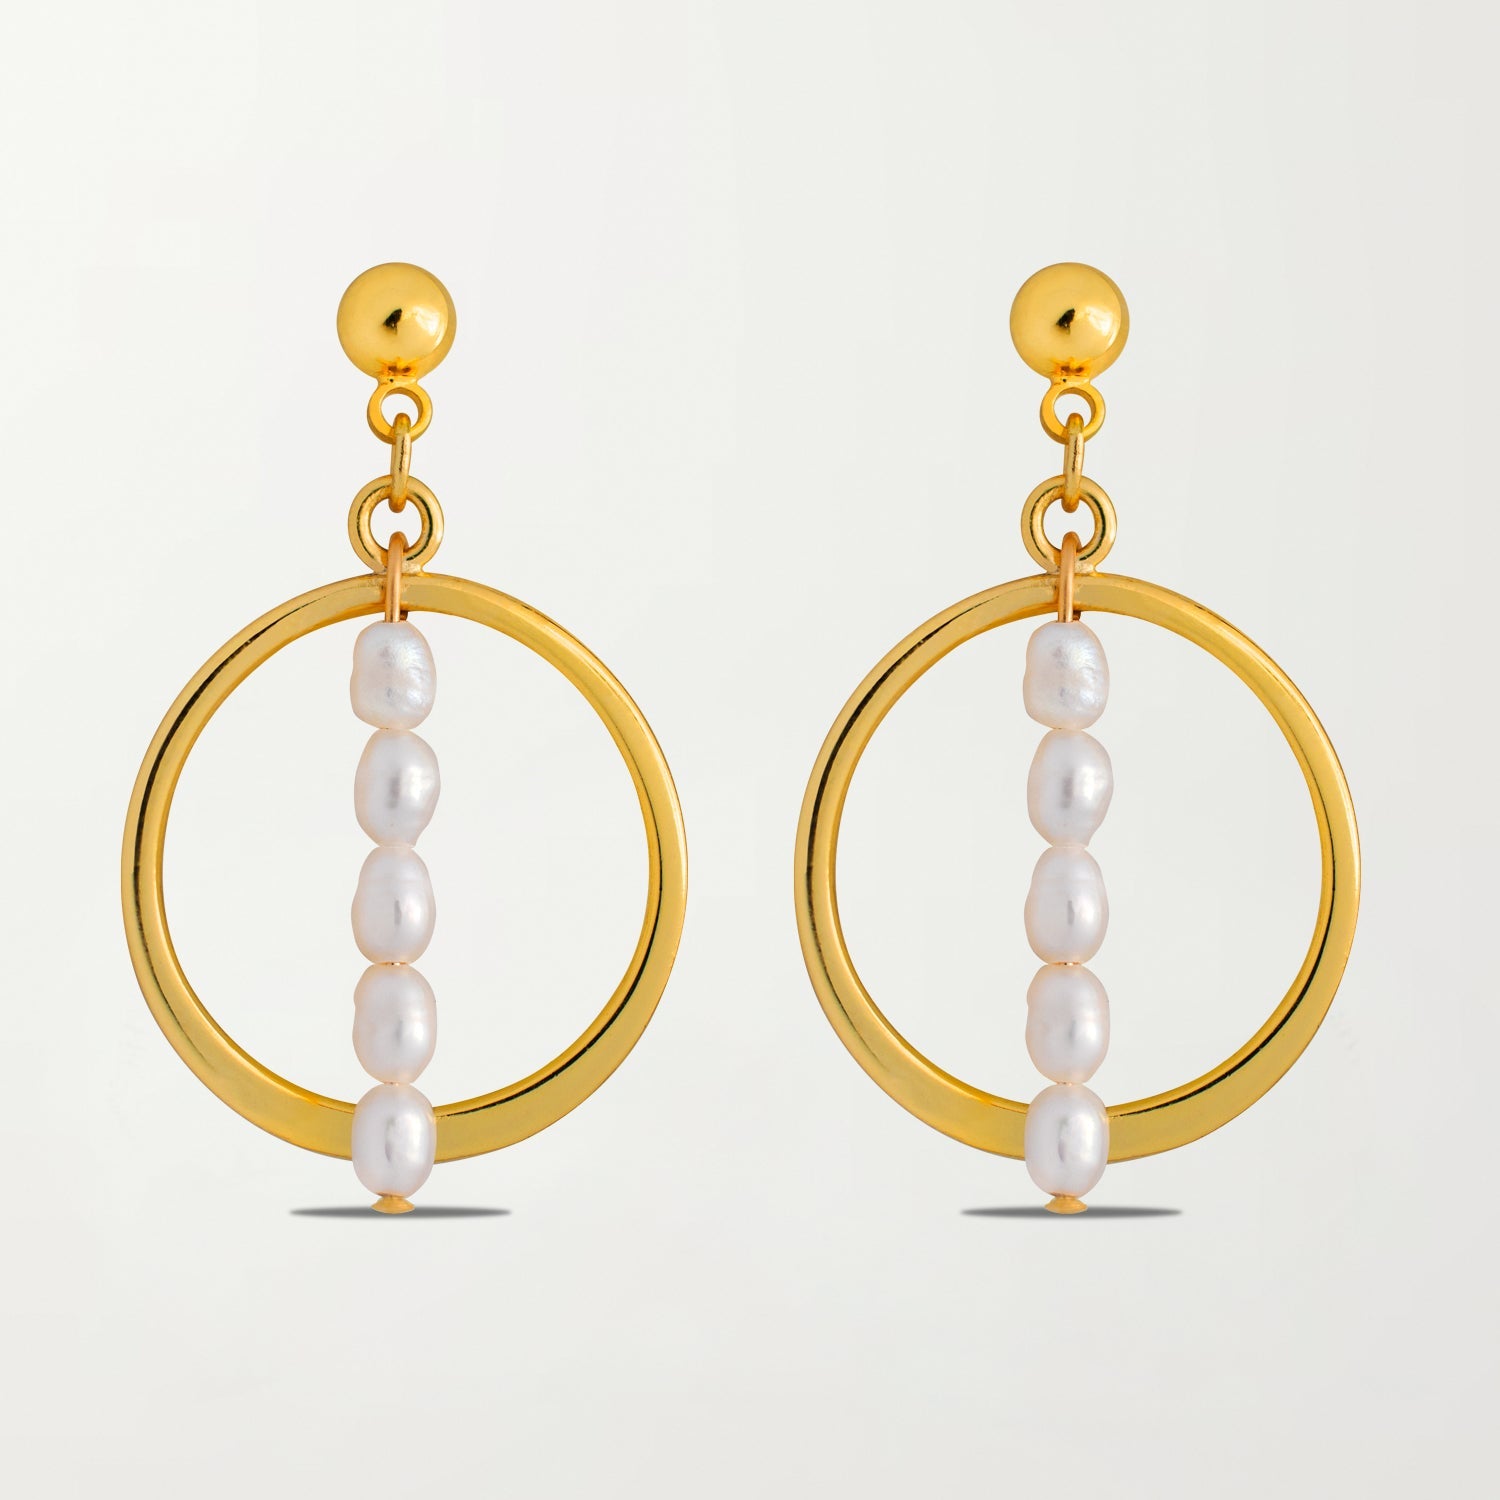 Picture of The Figueres Earrings